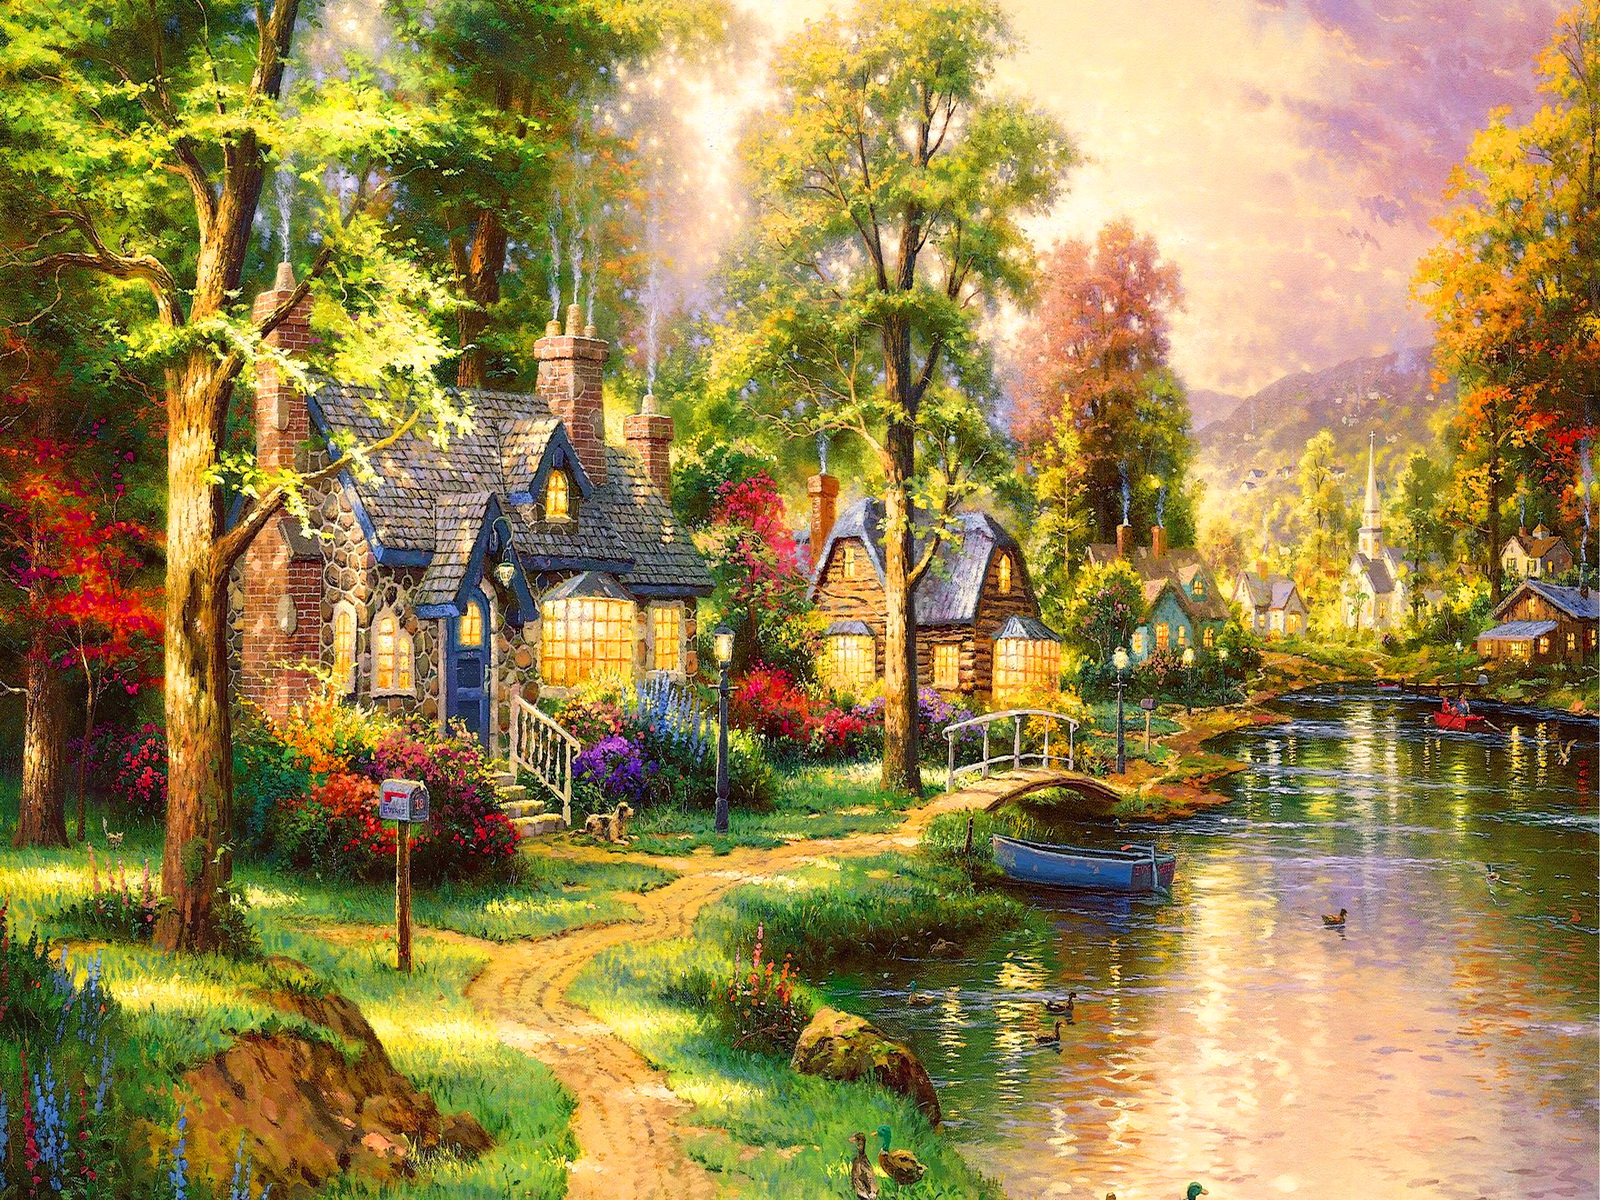 Free download Fairy tale place wallpaper ForWallpapercom [1600x1200